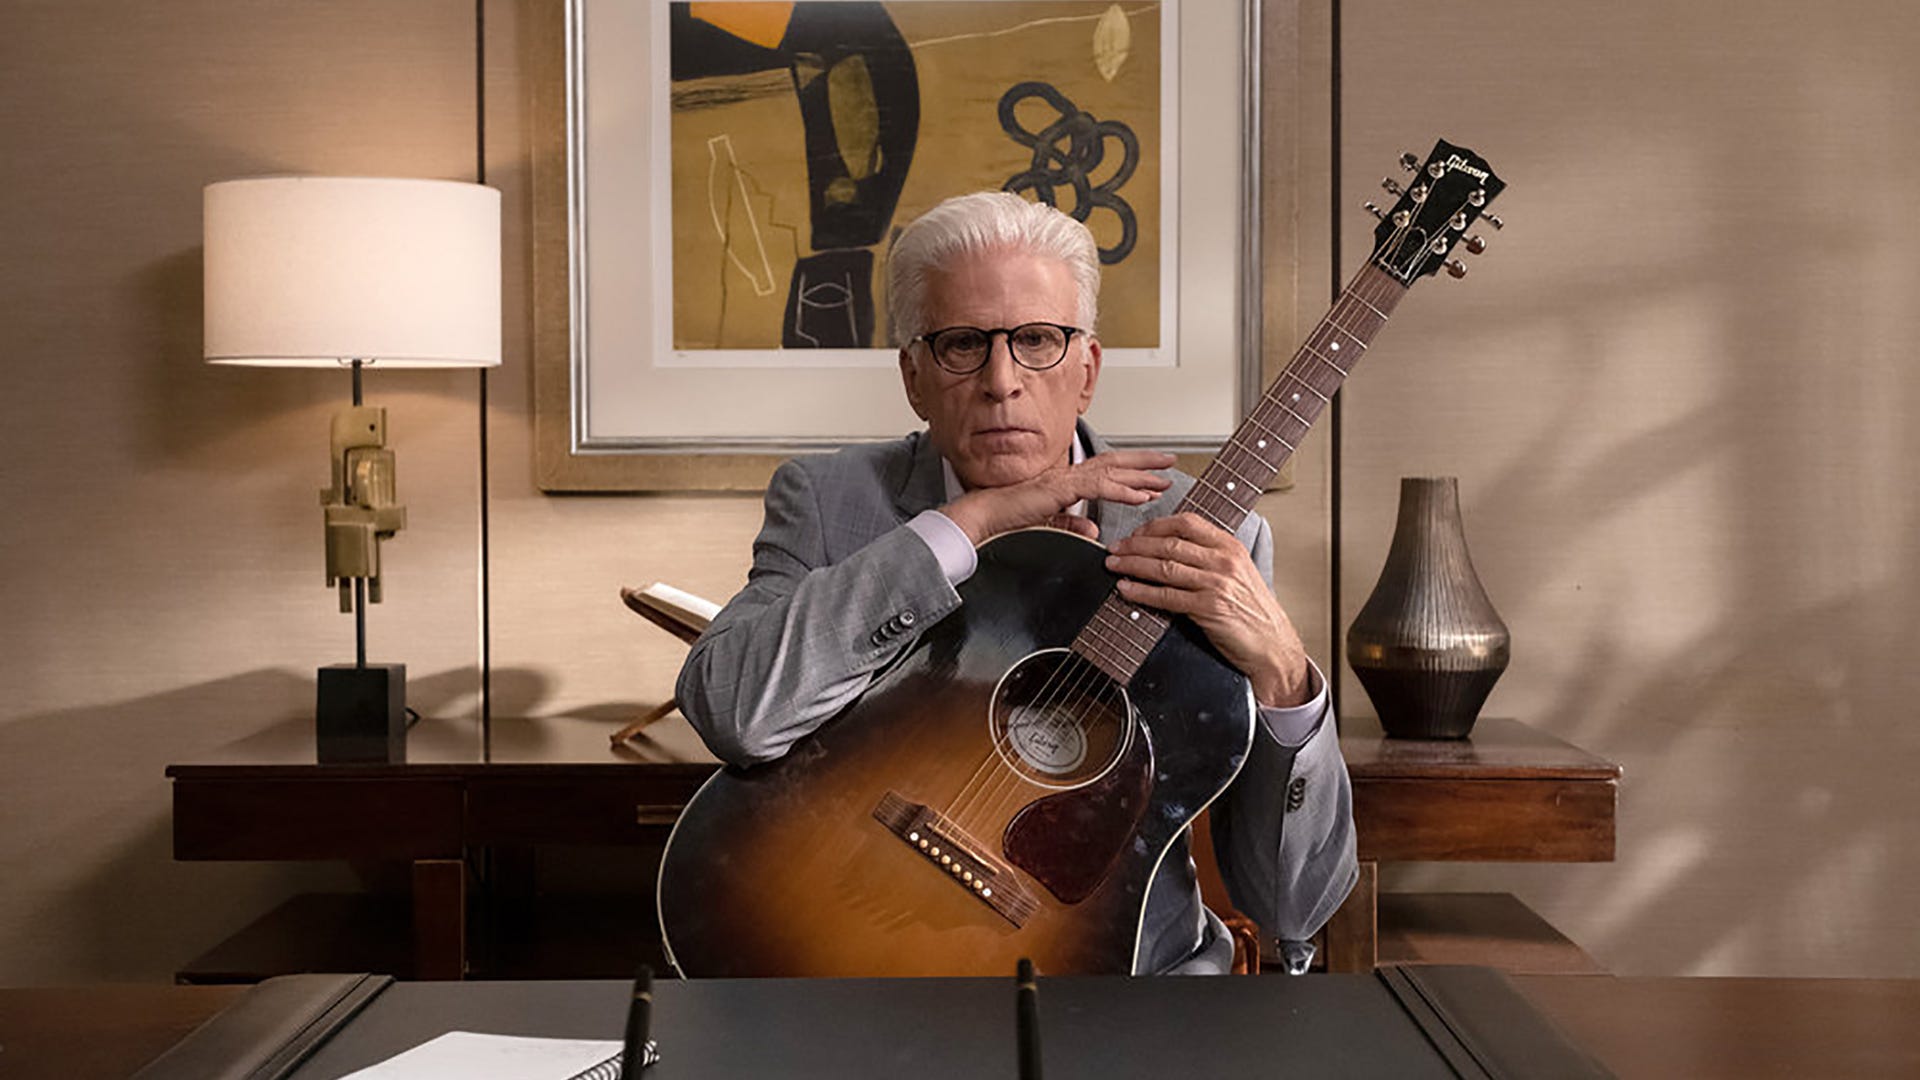 Ted Danson, The Good Place